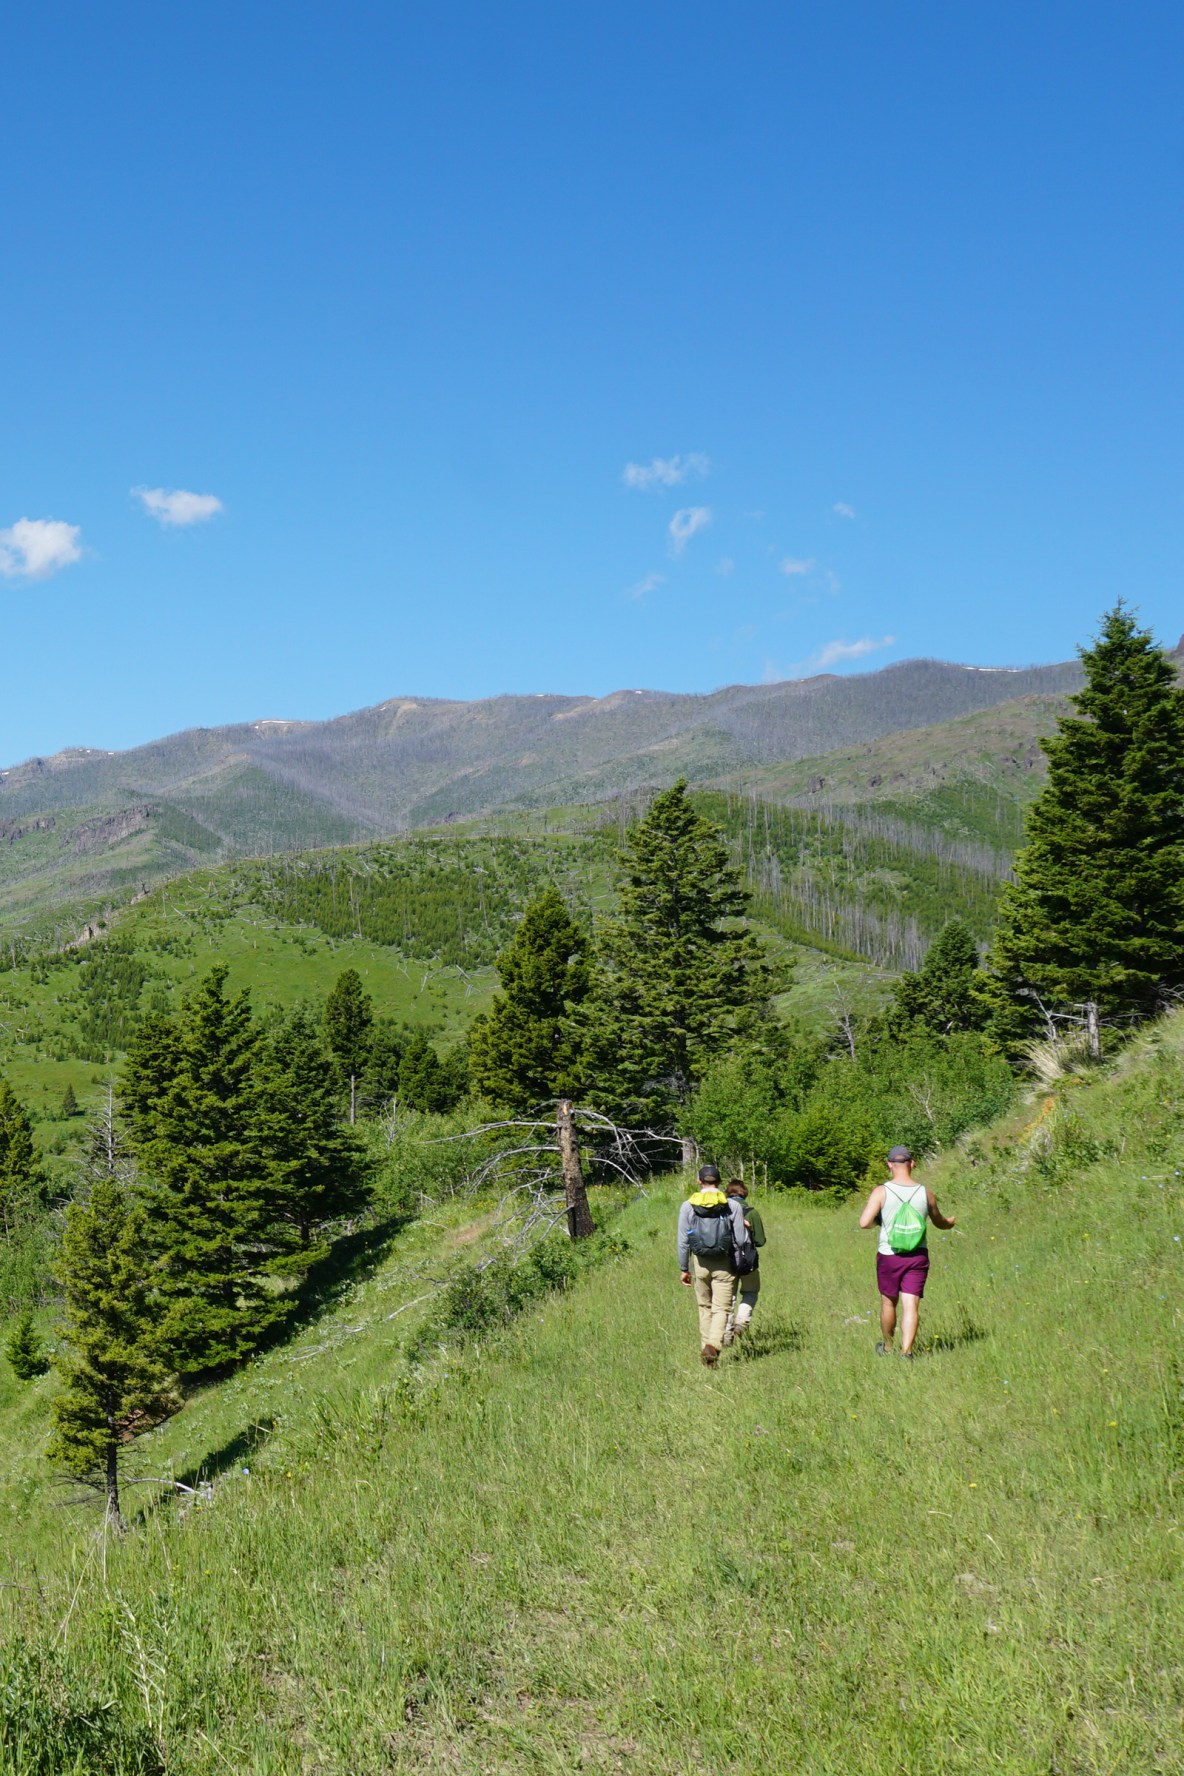 A few guests on a beautiful guided hike on private land of Big Sky country. 